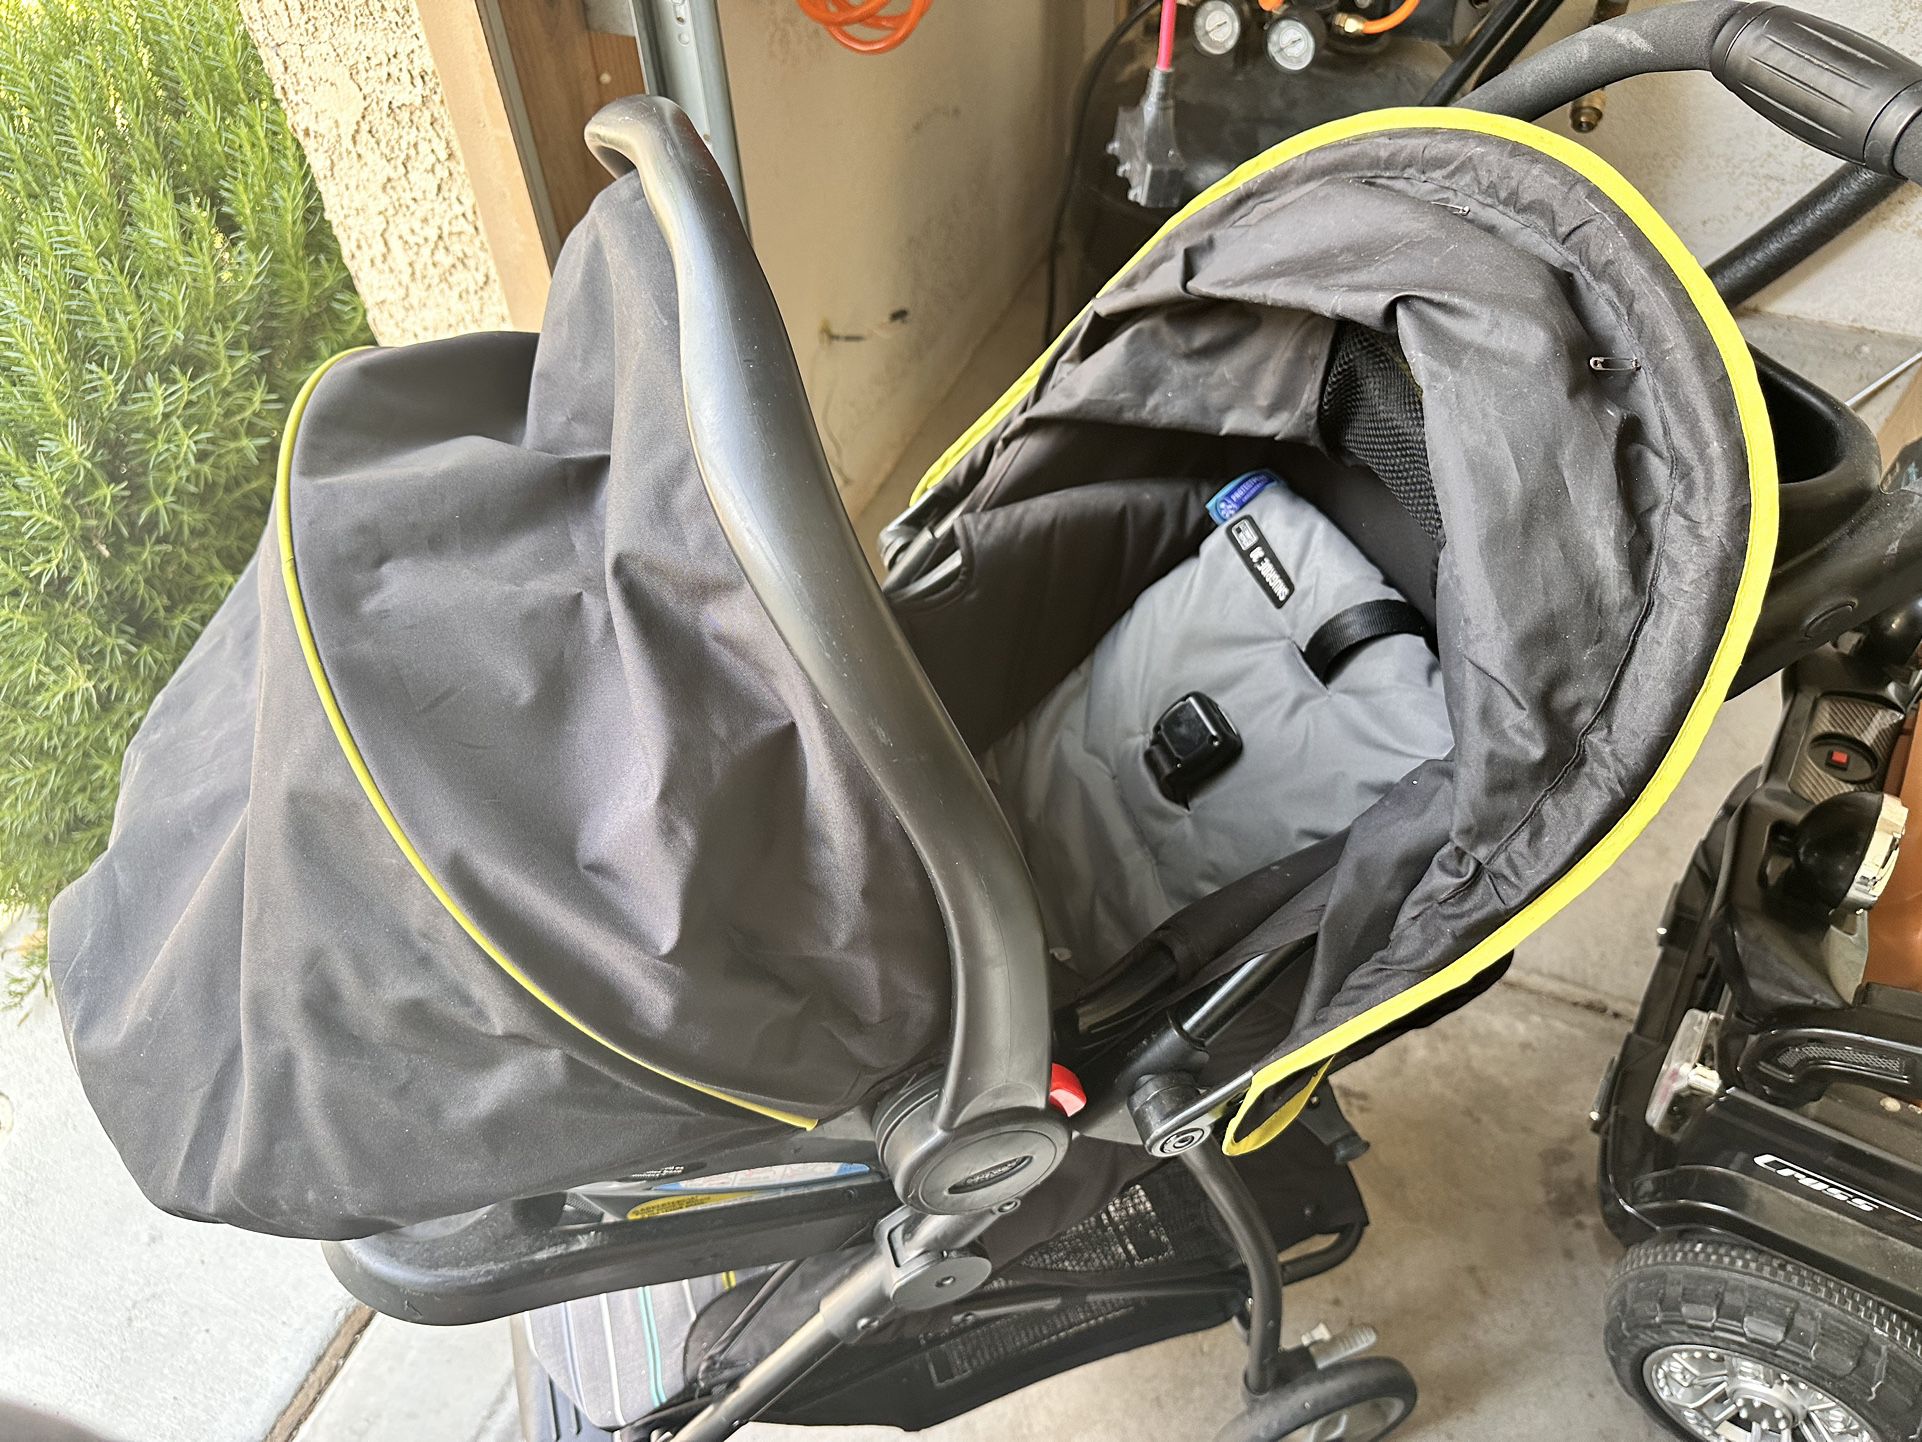 Graco Snugride Stroller And 2 Car seats With Bases